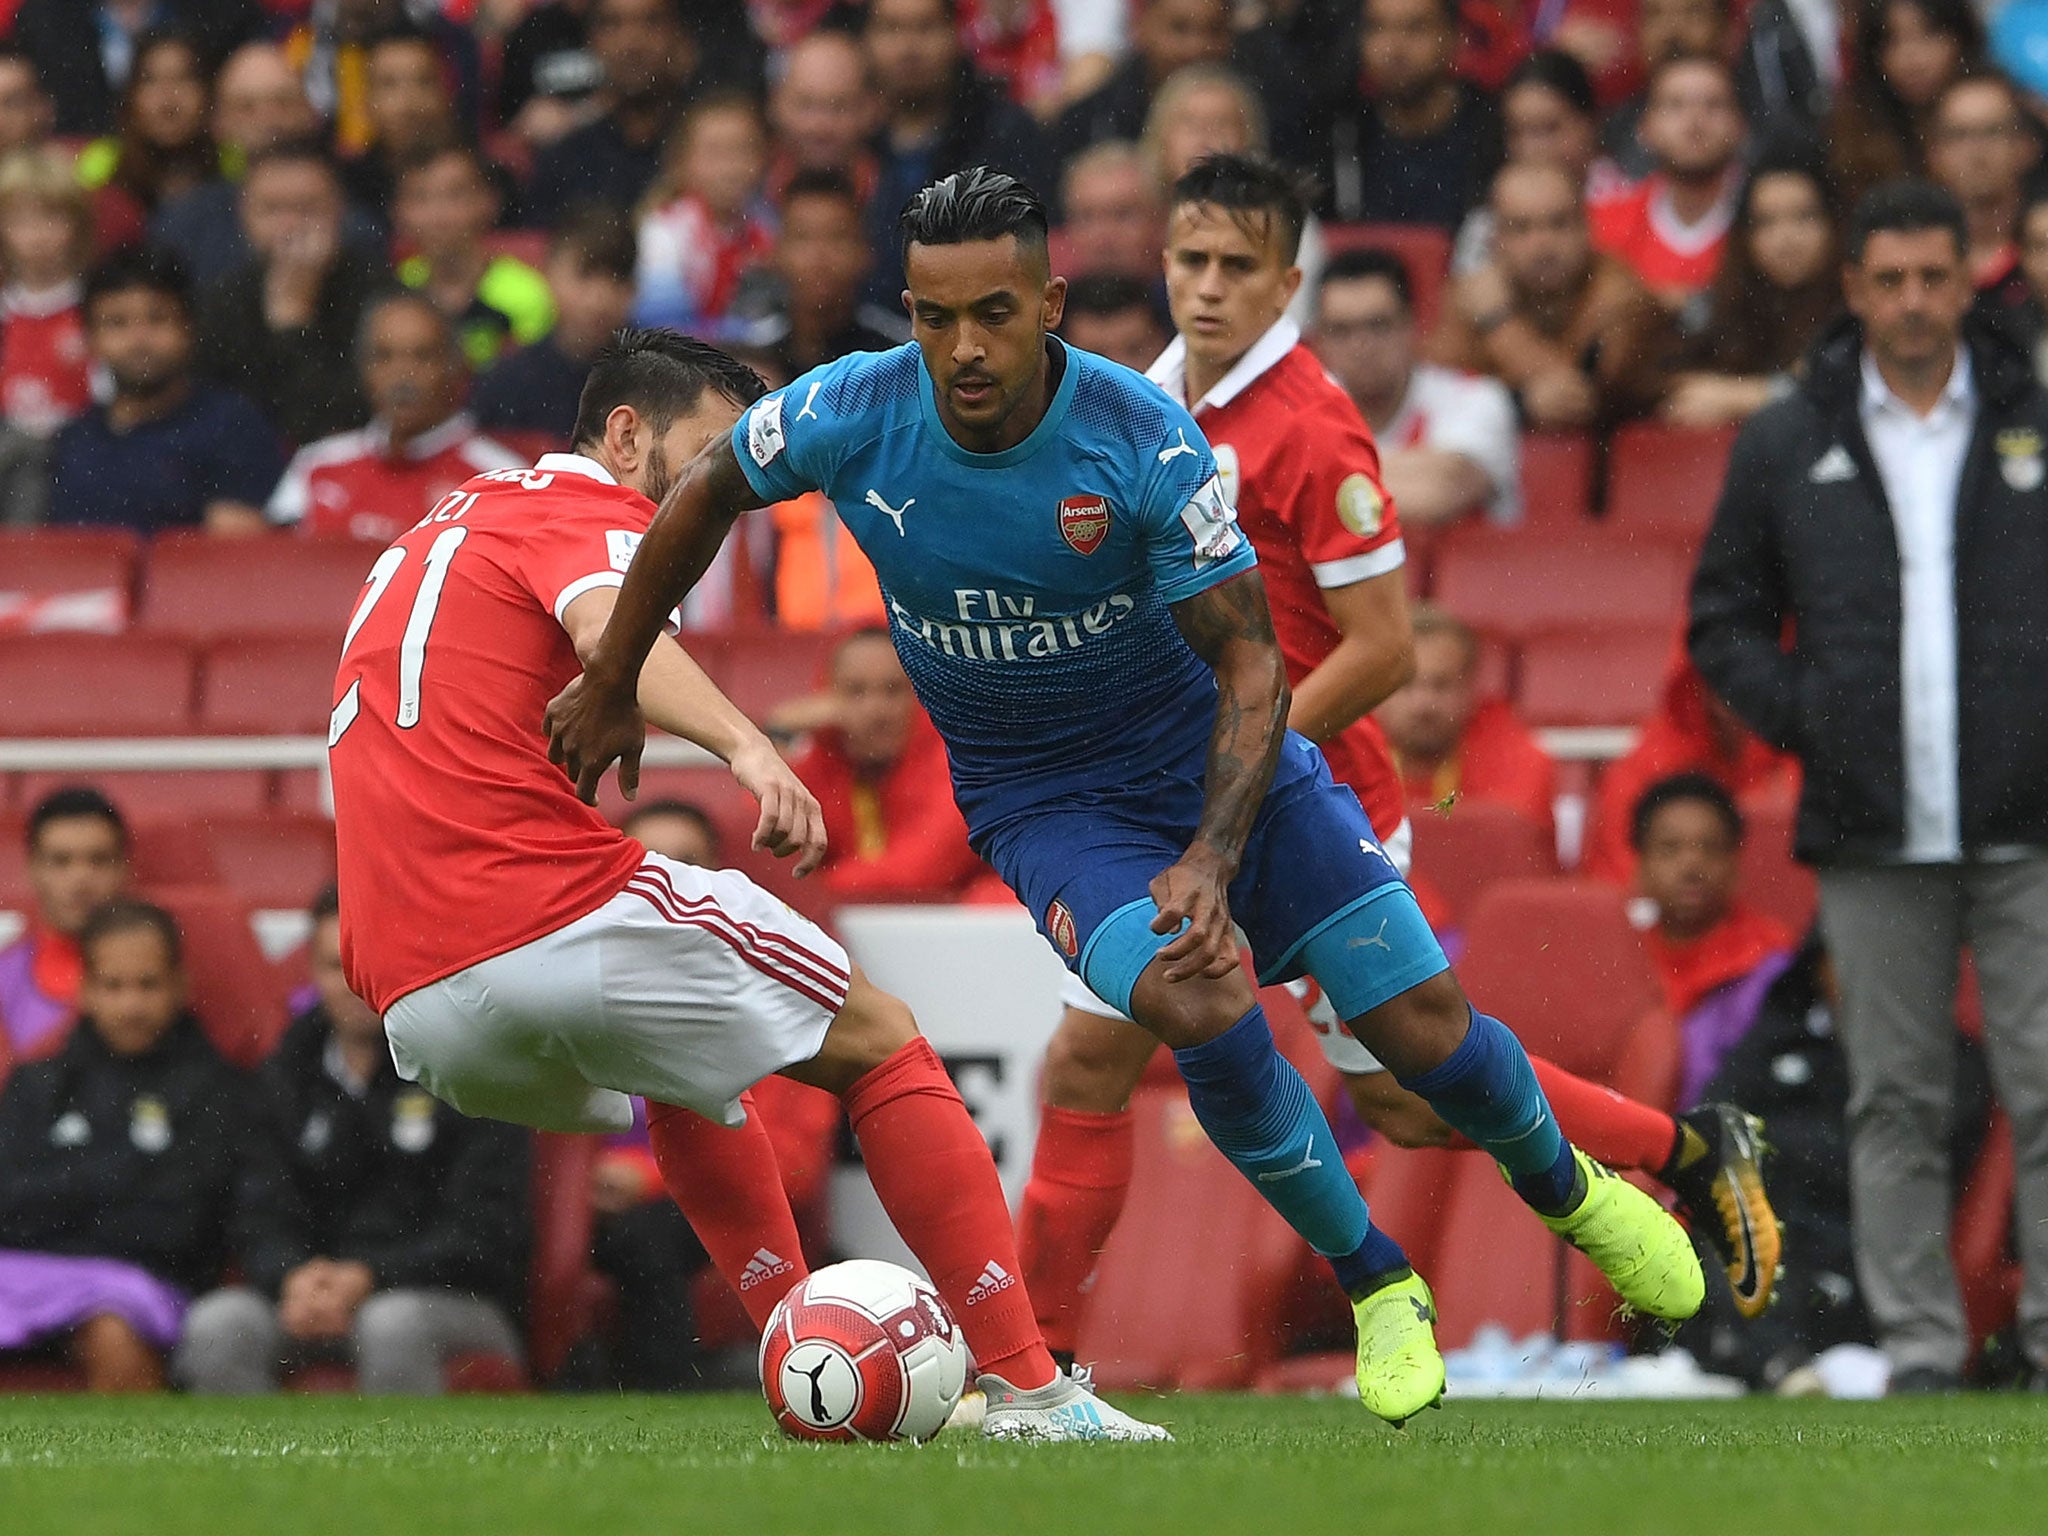 Theo Walcott scored twice and looked to take his chance to impress Arsene Wenger